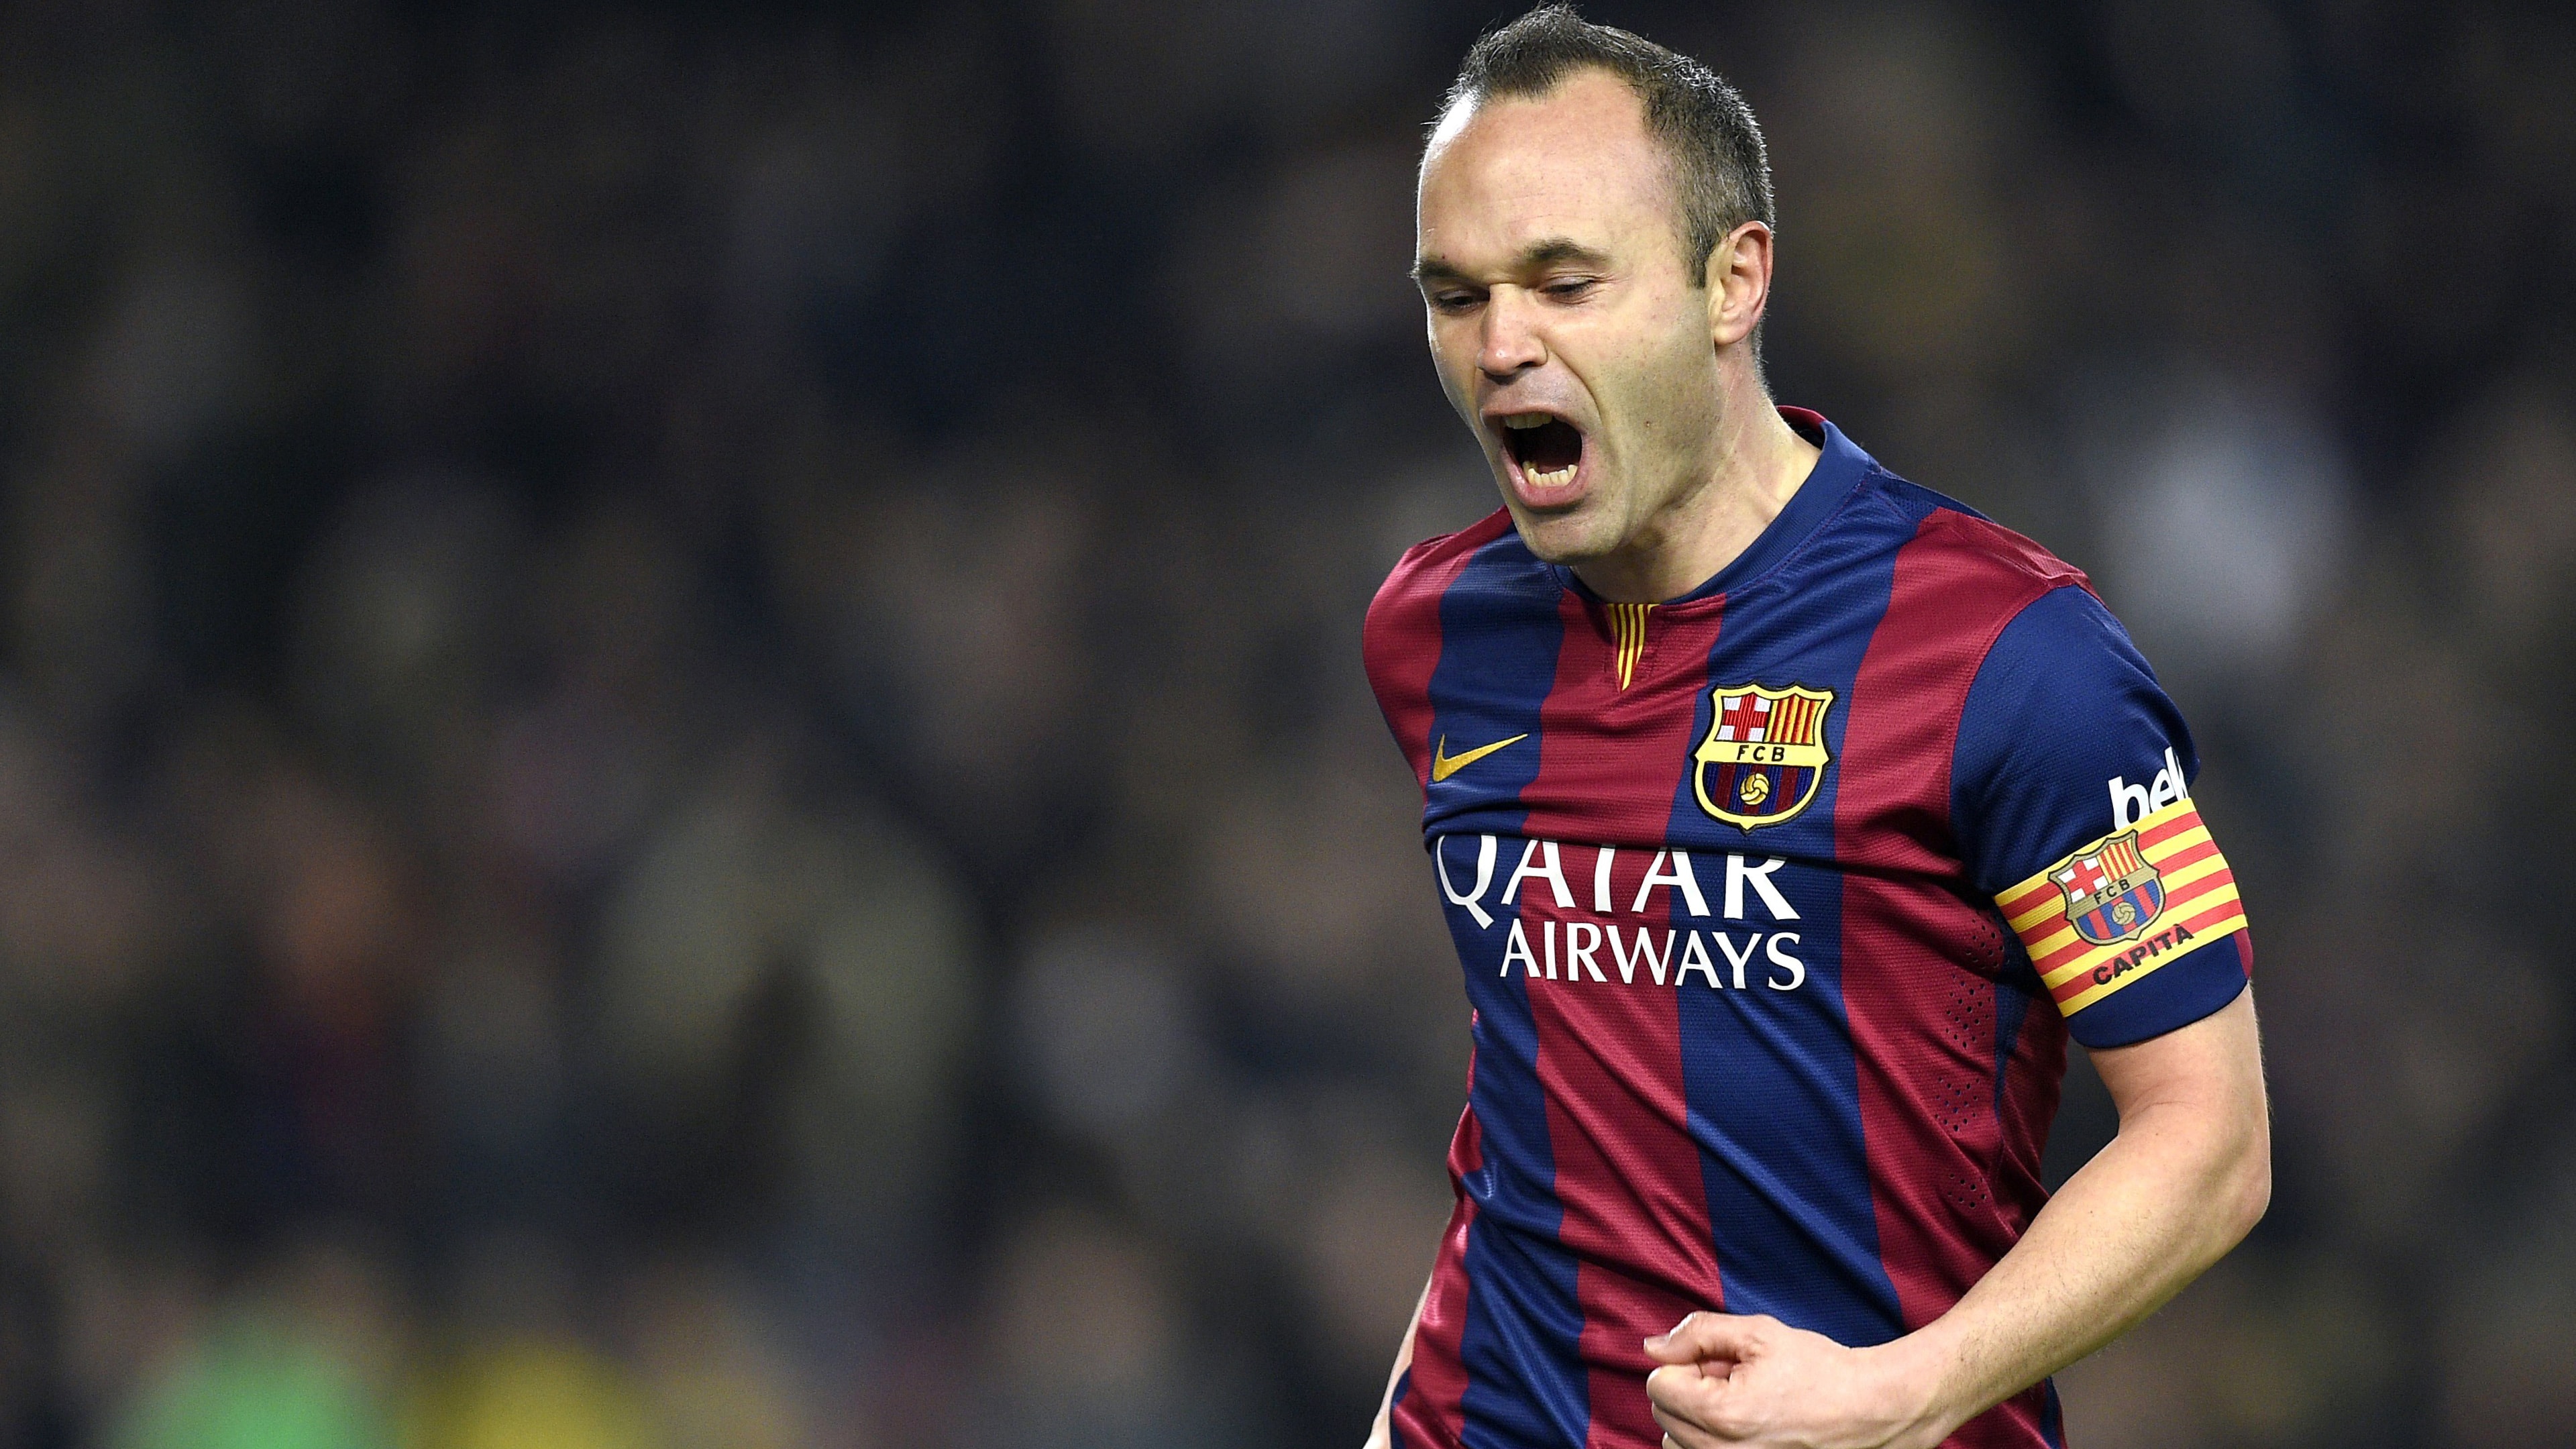 Andres Iniesta Hd Wallpapers 7wallpapers Net Images, Photos, Reviews